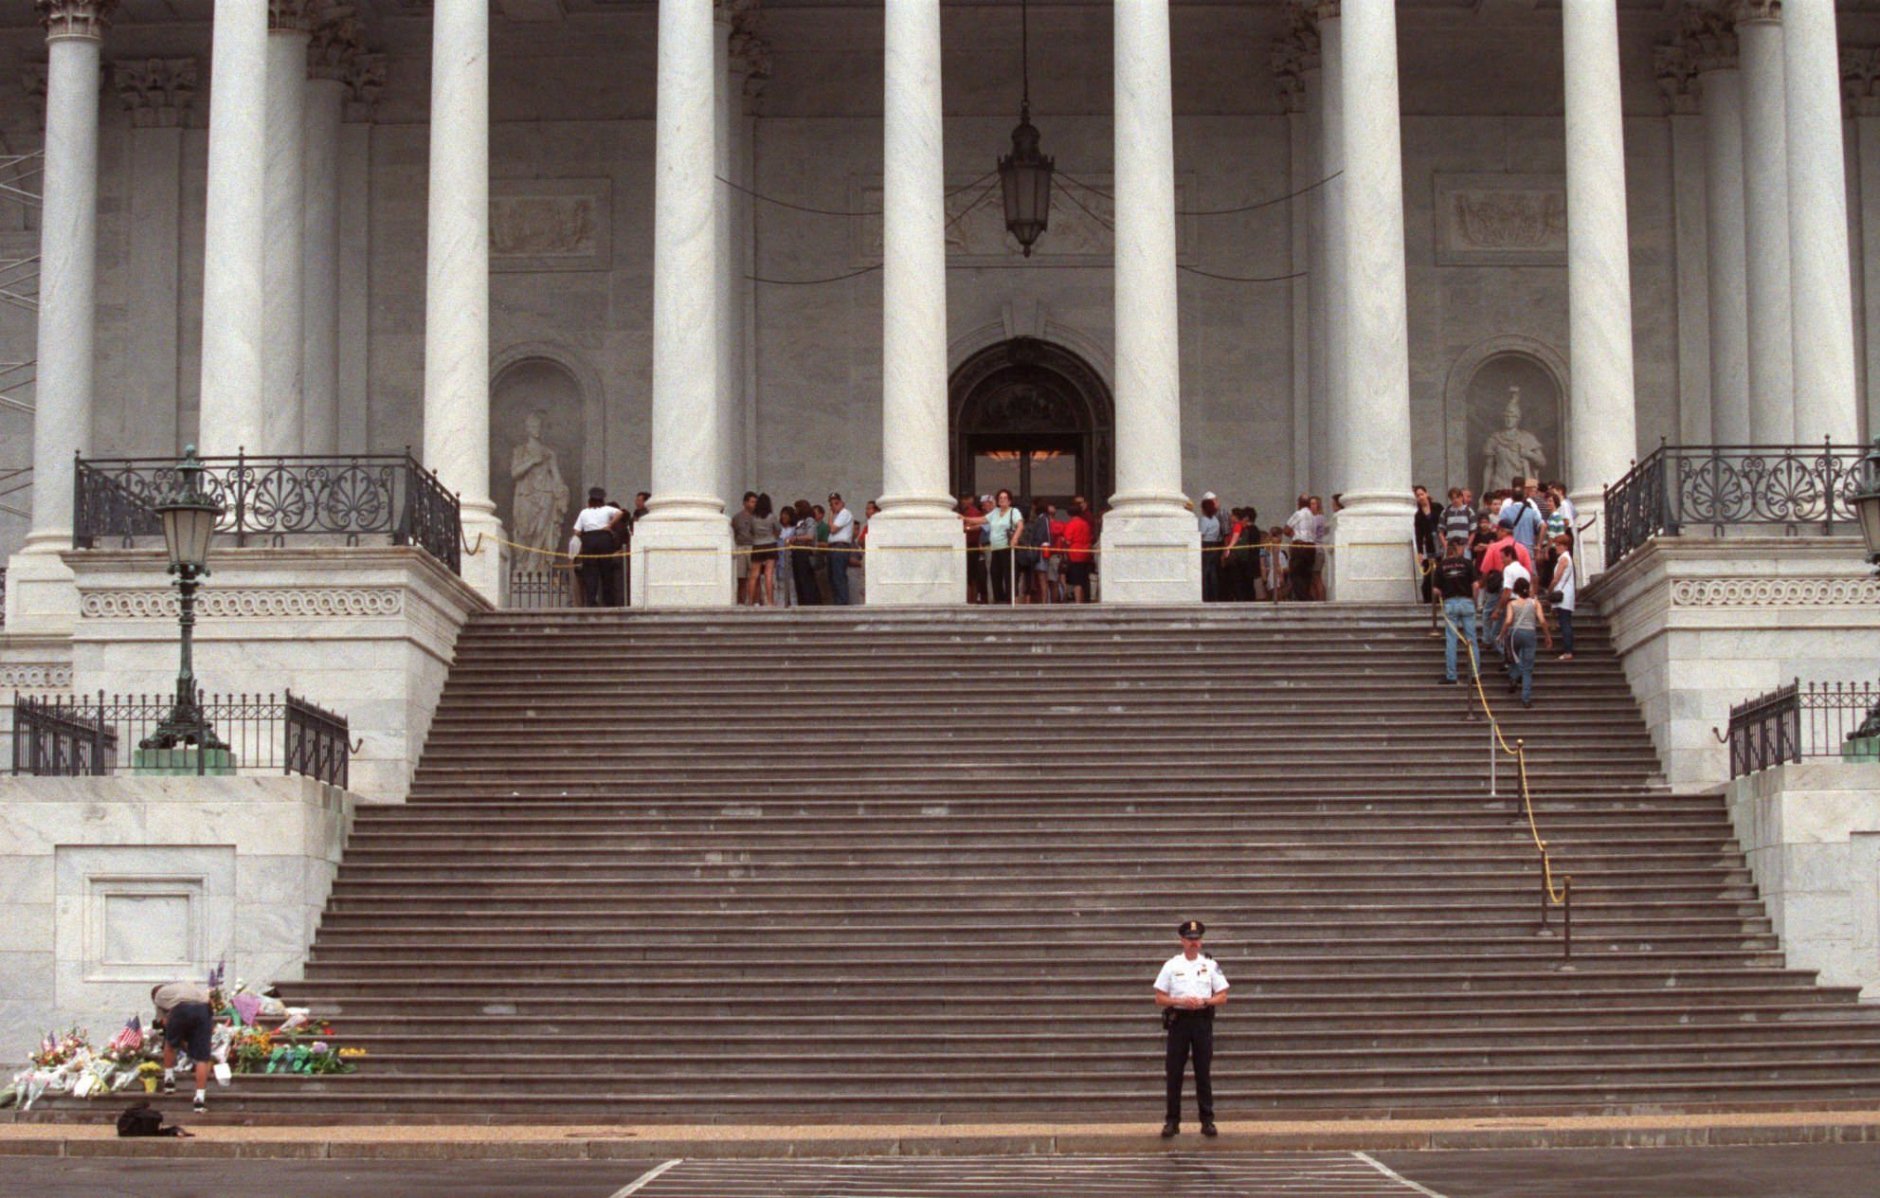 A Capitol Hill police officer stands watch in front of the U. S. Capitol Sunday, July 26, 1998 in Washington as visitors wait to enter the building.  Two officers were killed and a tourist wounded during a brief shooting spree in the building on Friday, July 24, 1998.  The tourist has been released from the hospital and the suspect in the shootings remains hospitalized in serious condition after being shot by police.   (AP Photo/Khue Bui)